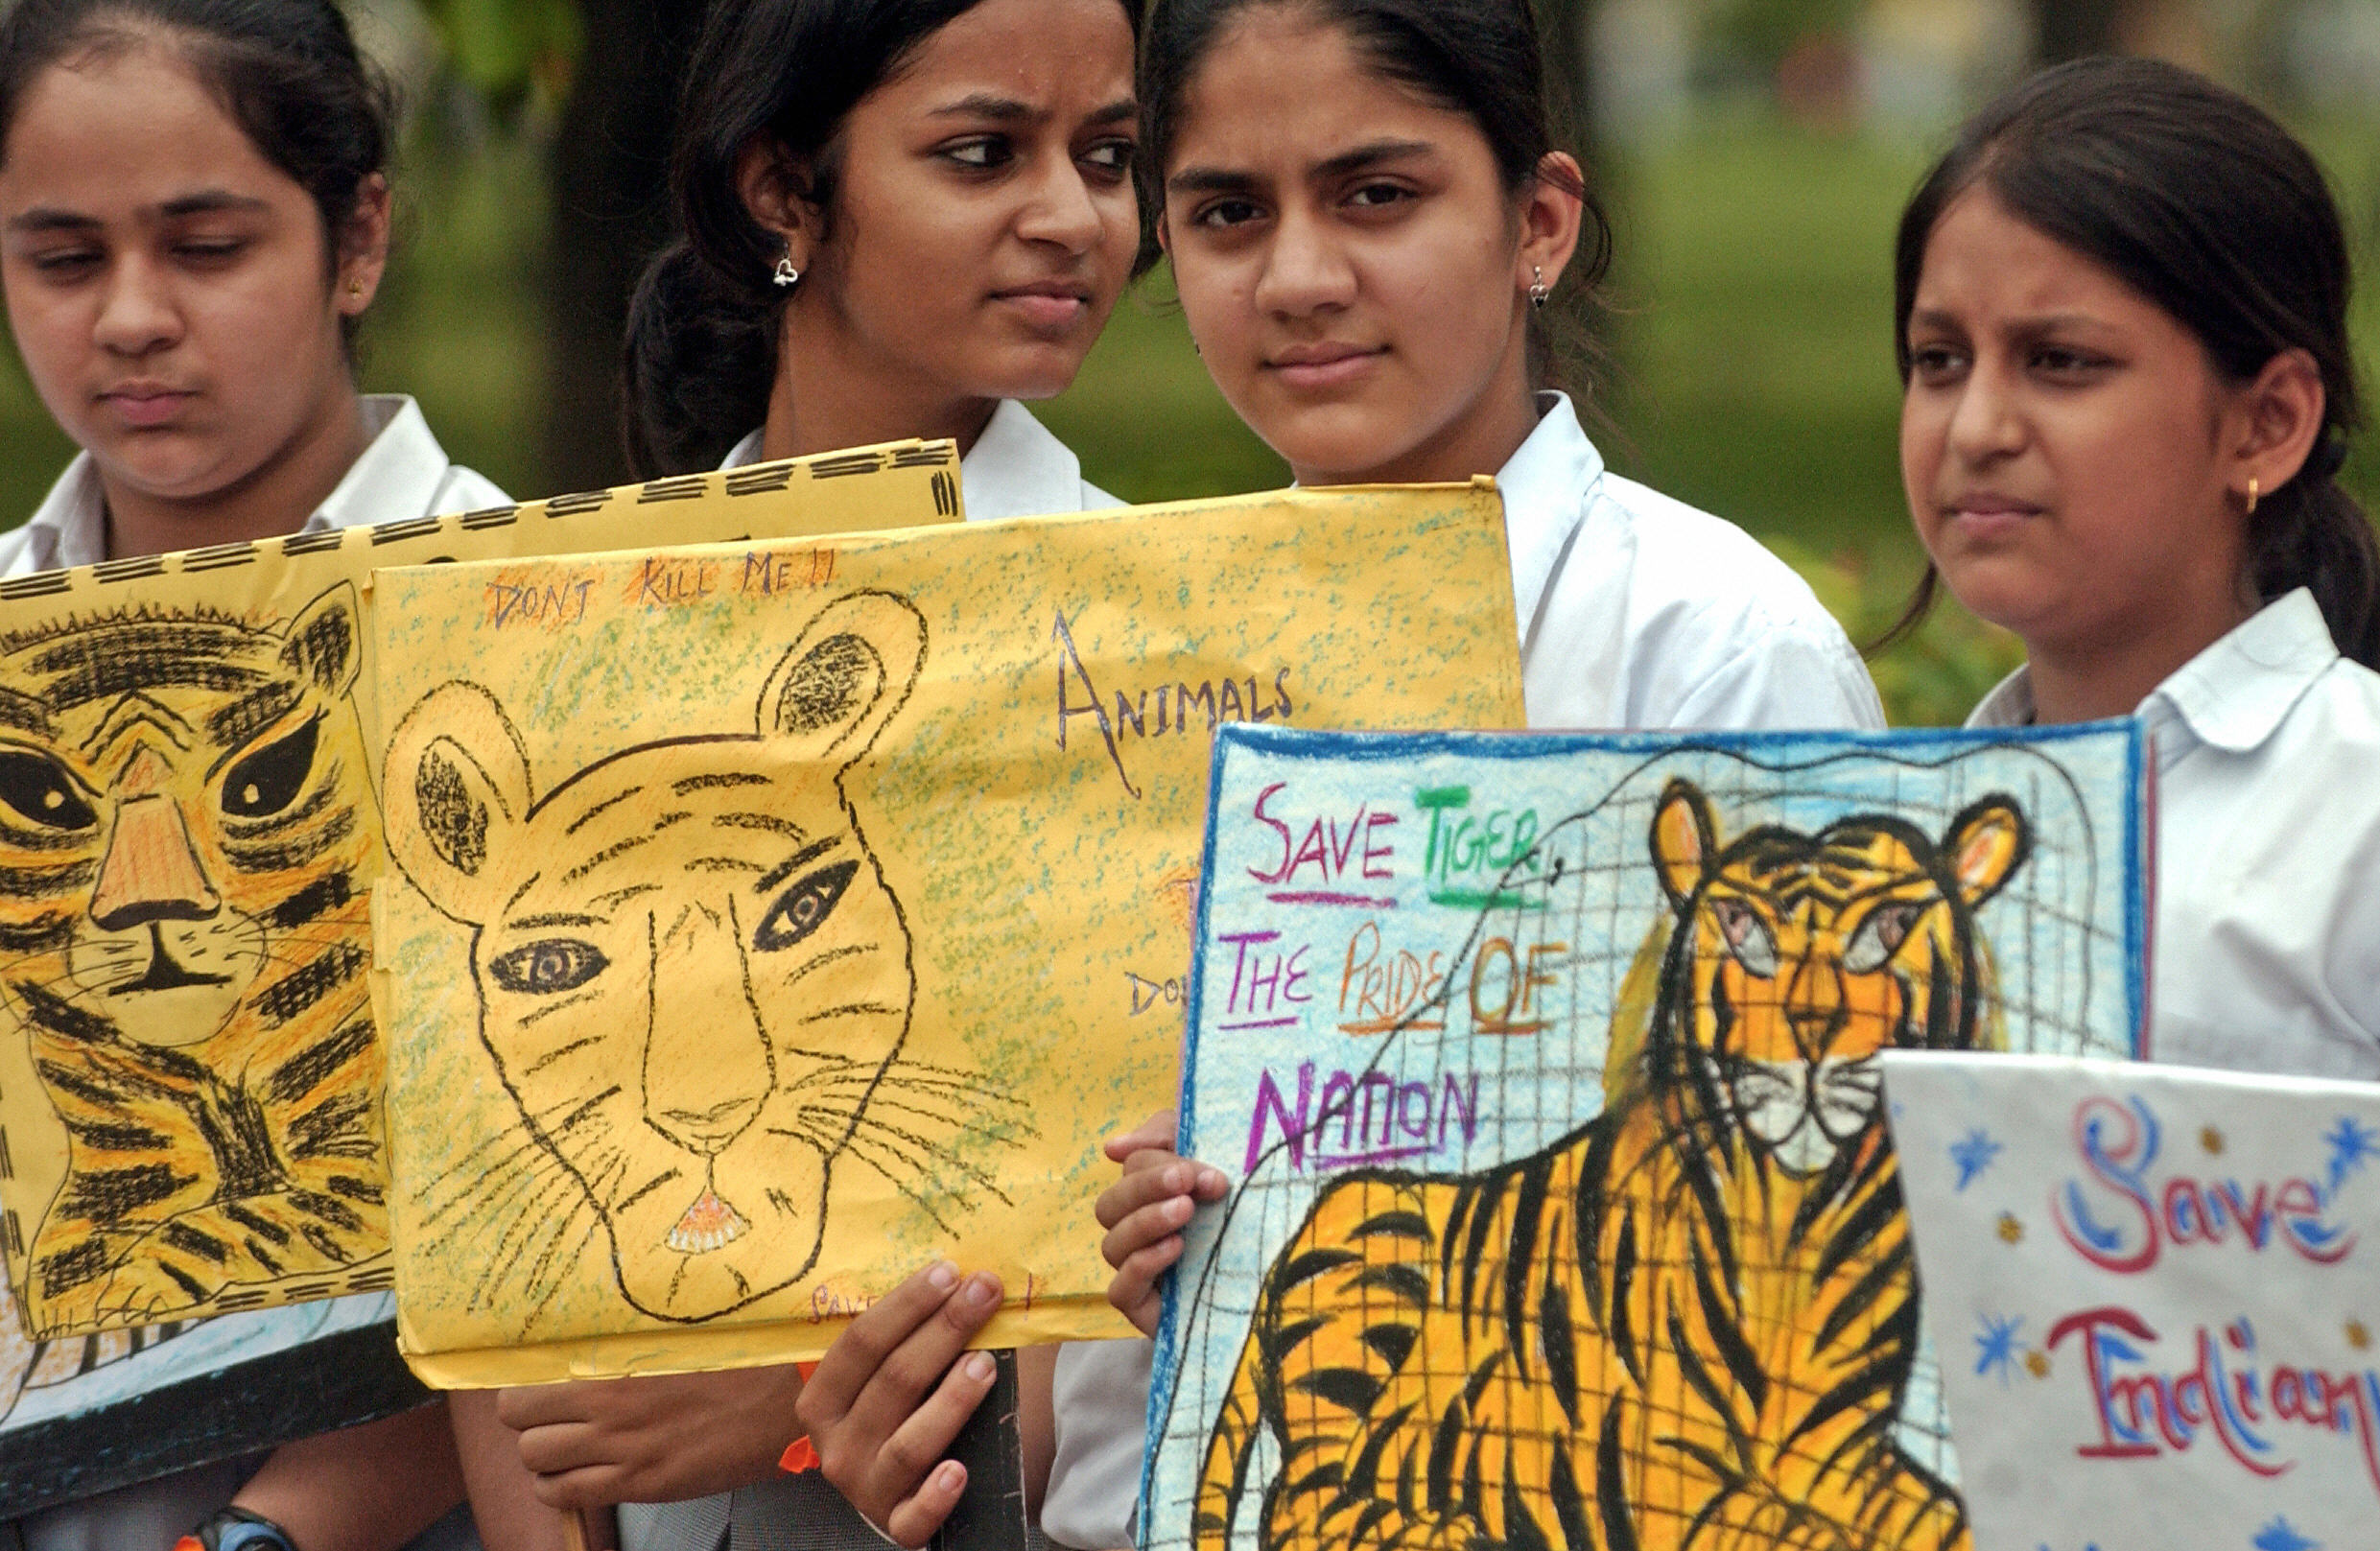 Indian school children hold placards during a rally held to raise awareness for the protection of tigers and forests in India, in New Delhi, July 11, 2006. (Manpreet Romana—AFP/Getty Images)